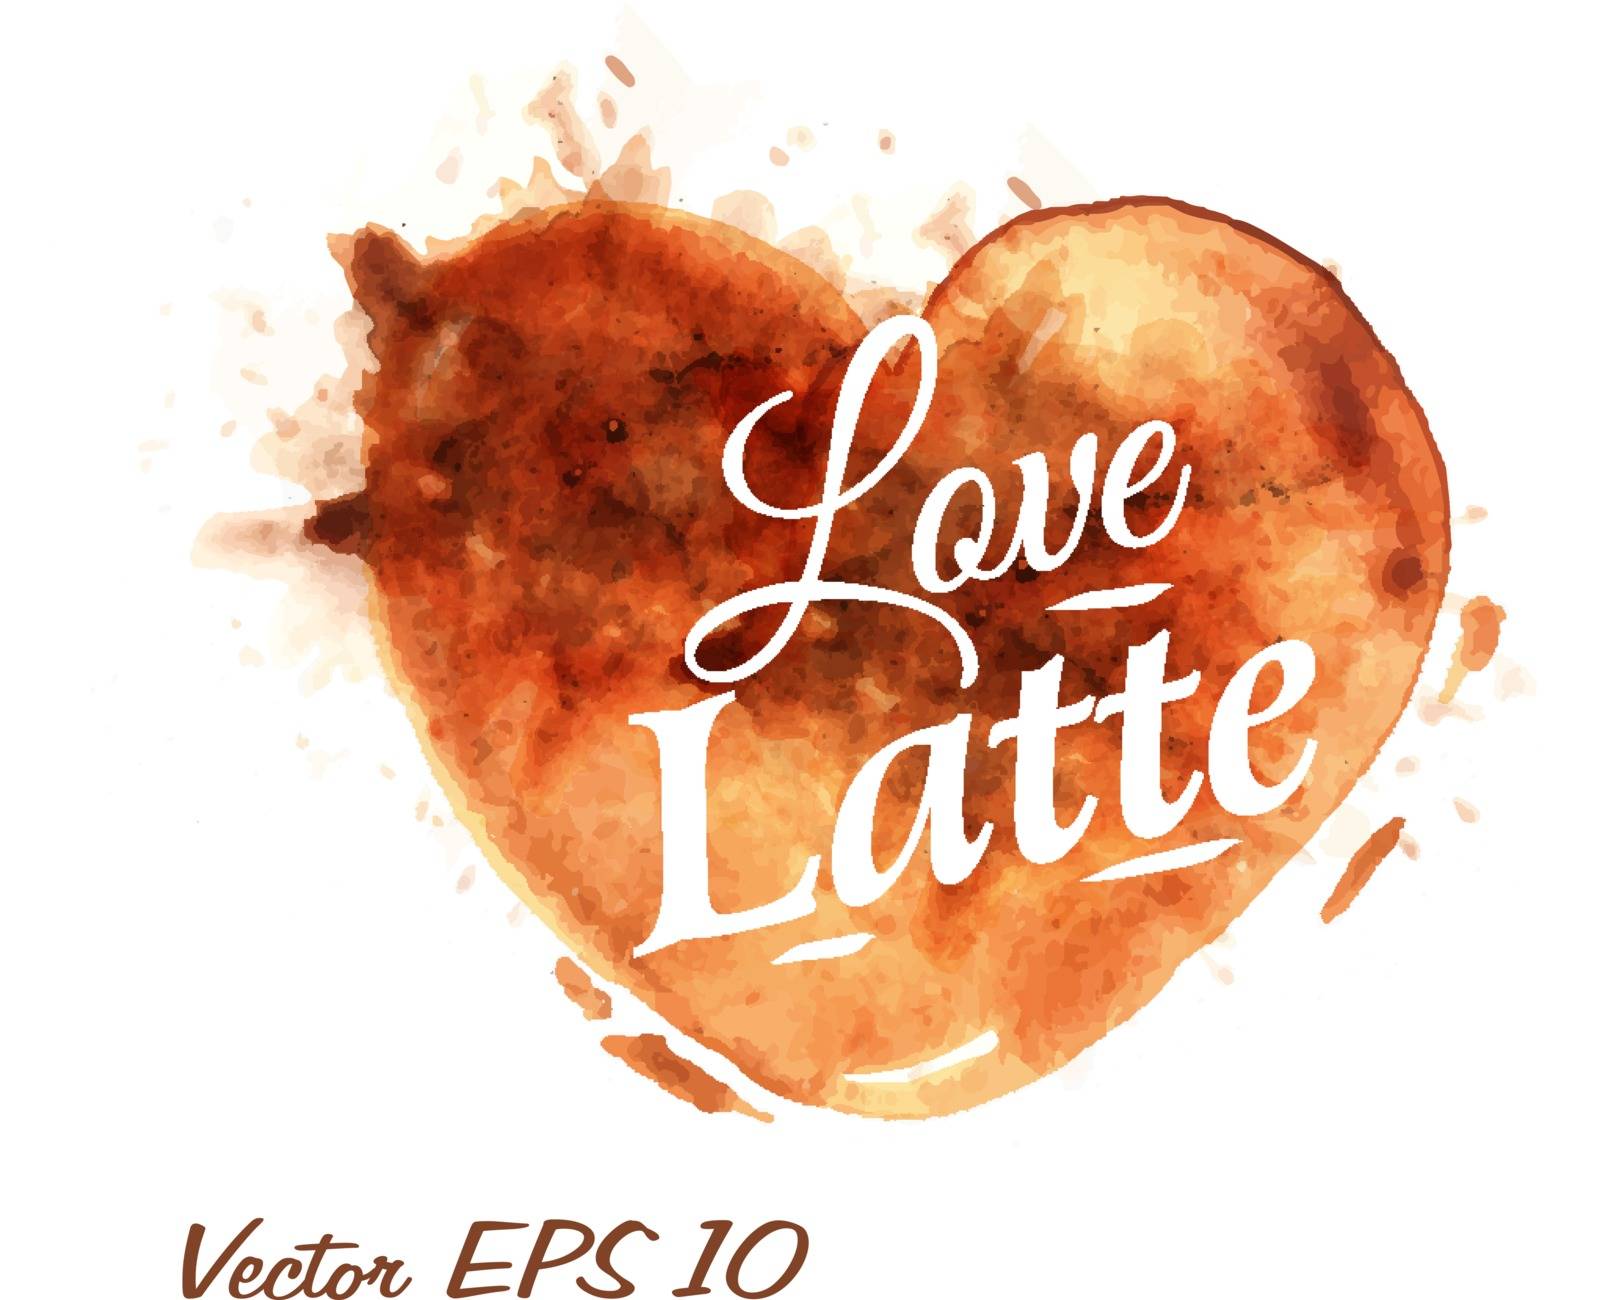 Heart drawn pour coffee with the inscription love latte with splashes and blots prints Cup vector 10